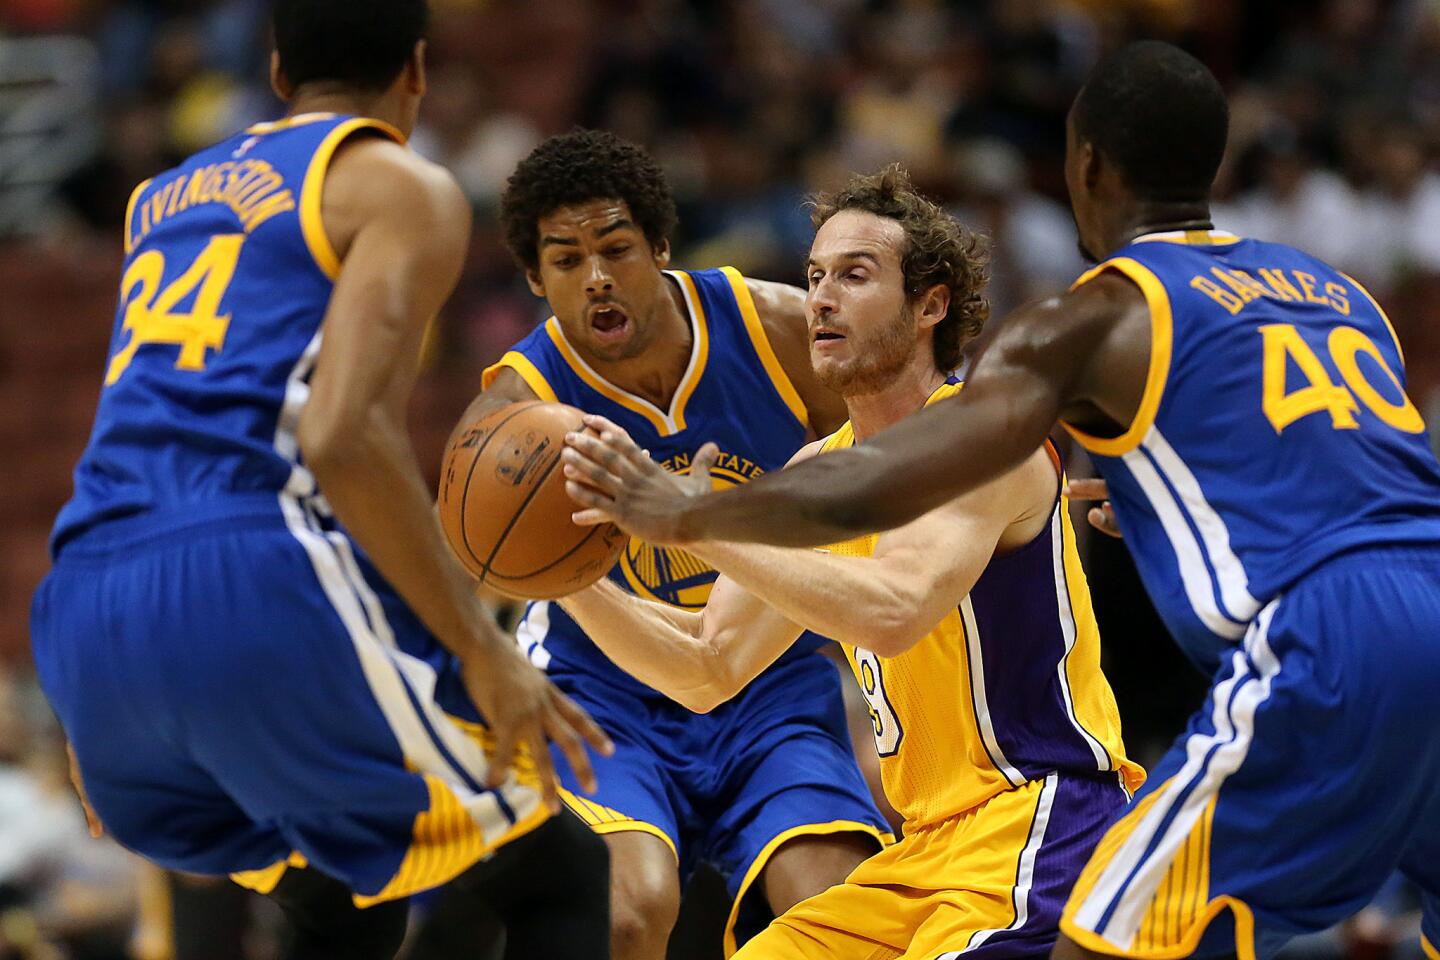 Lakers guard Marcelo Huertas looks to pass as three Warriors defenders converge on him in a preseason game at Honda Center on Thursday night.